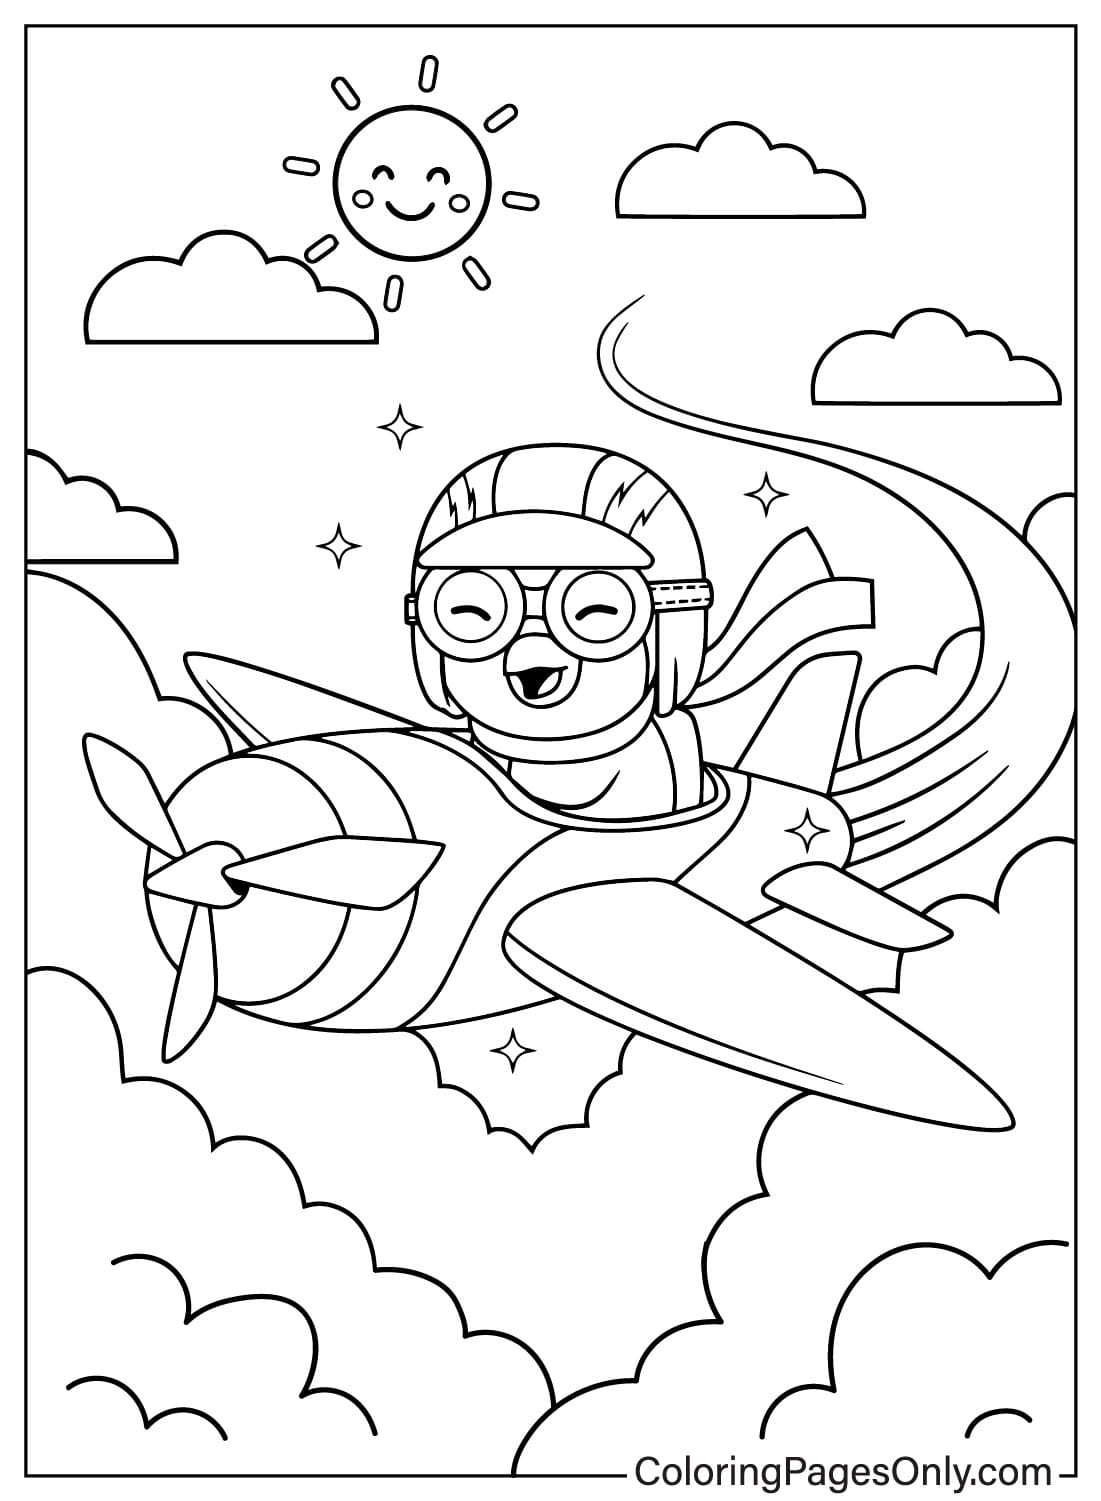 Pororo Coloring Page Free from Pororo the Little Penguin